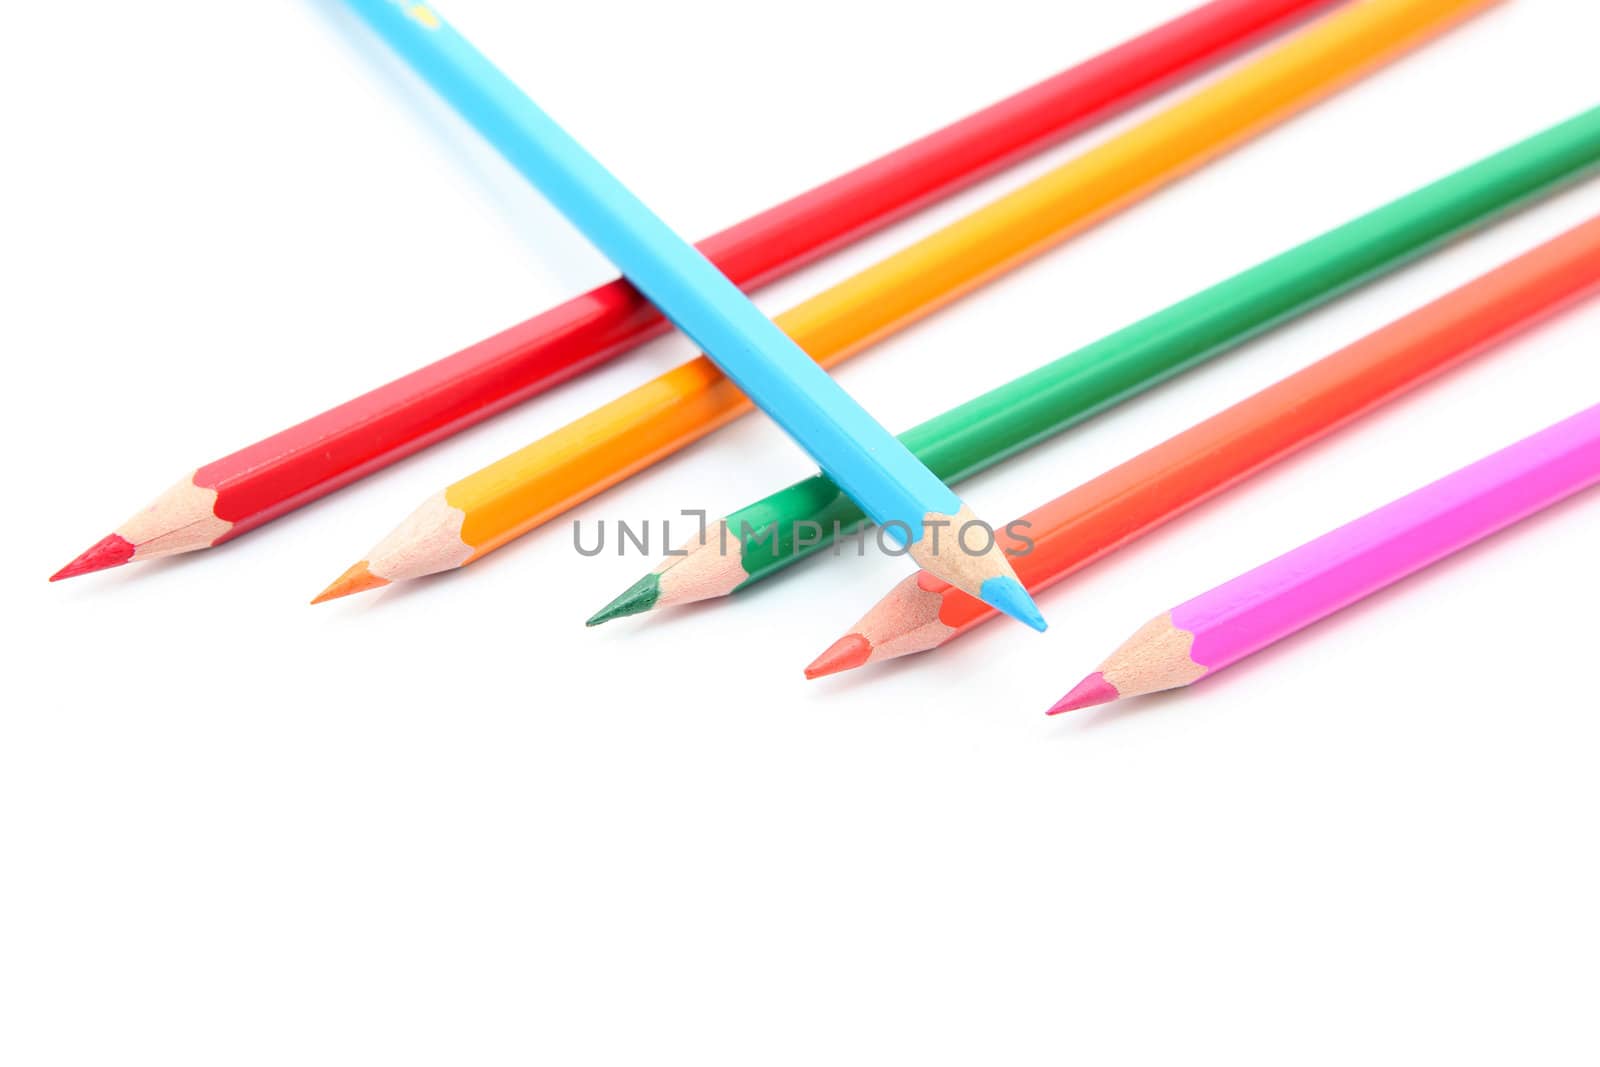 six color pencils isolated on white background with copyspace